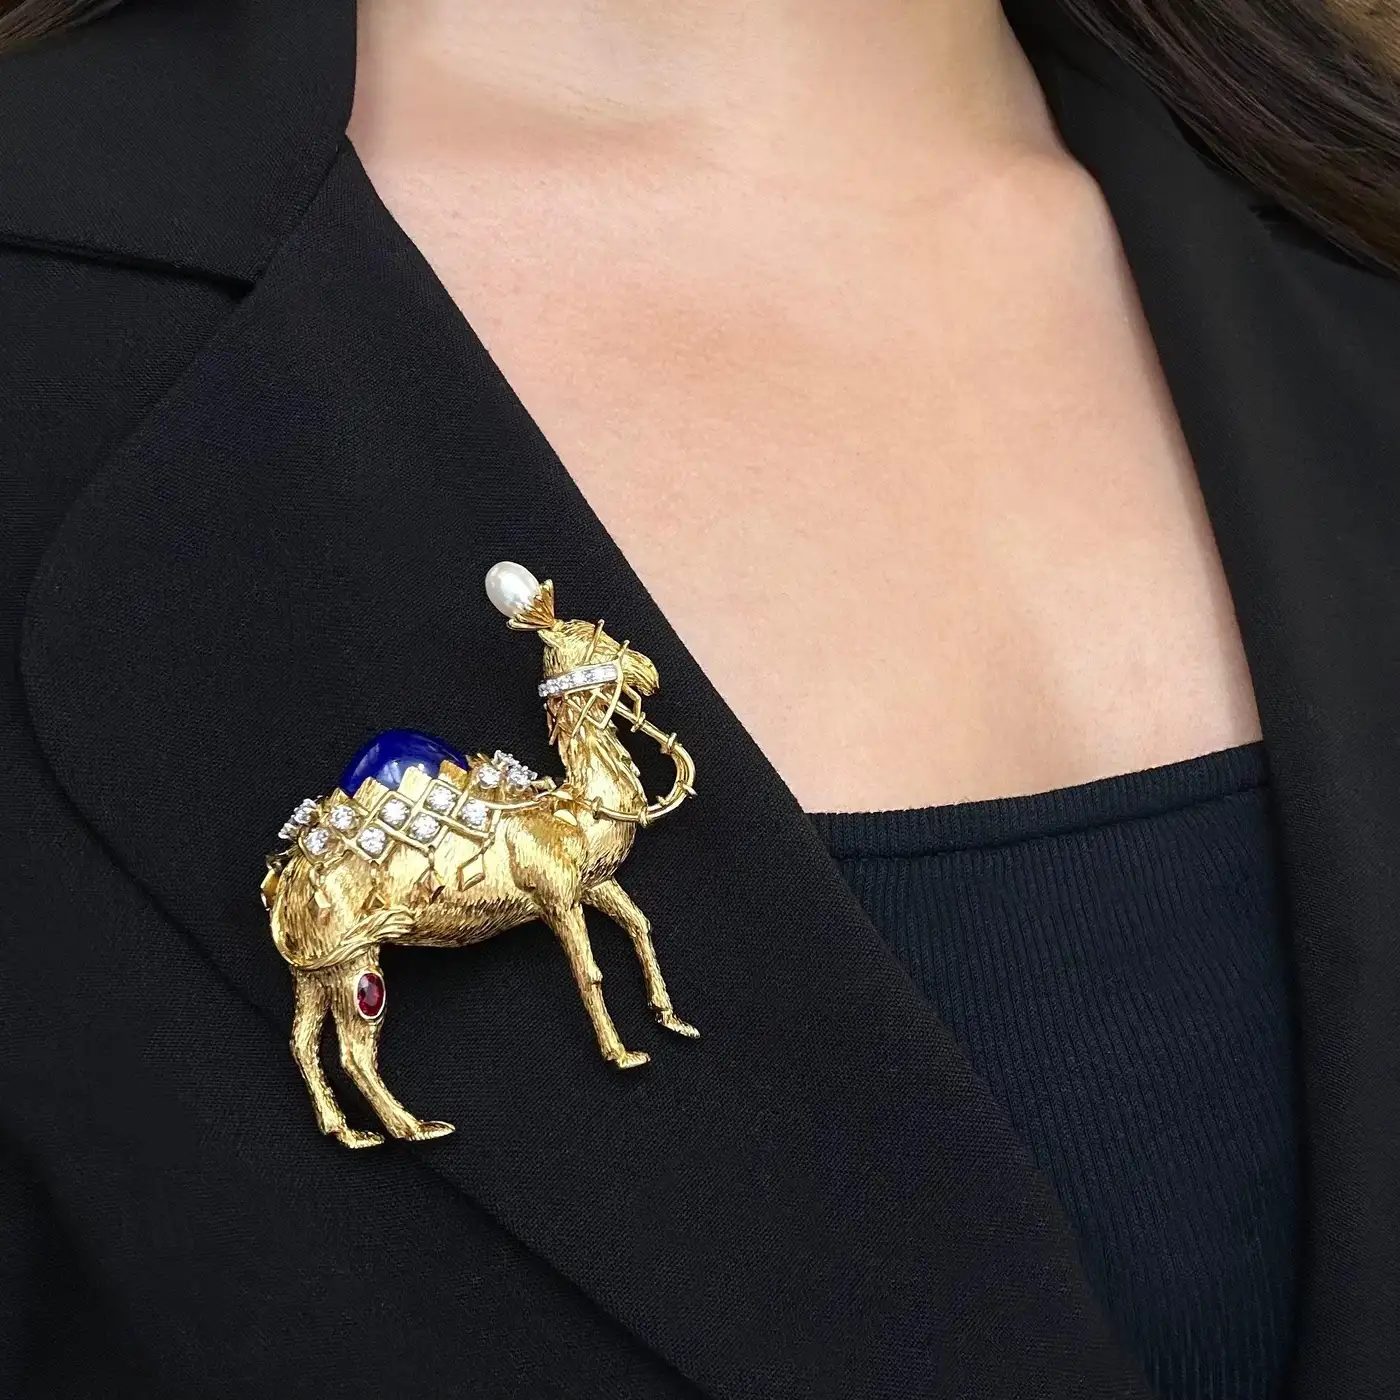 Diamond-and-Lapis-Lazuli-Camel-Brooch-Jean-Schlumberger-for-Tiffany-Co-3.webp